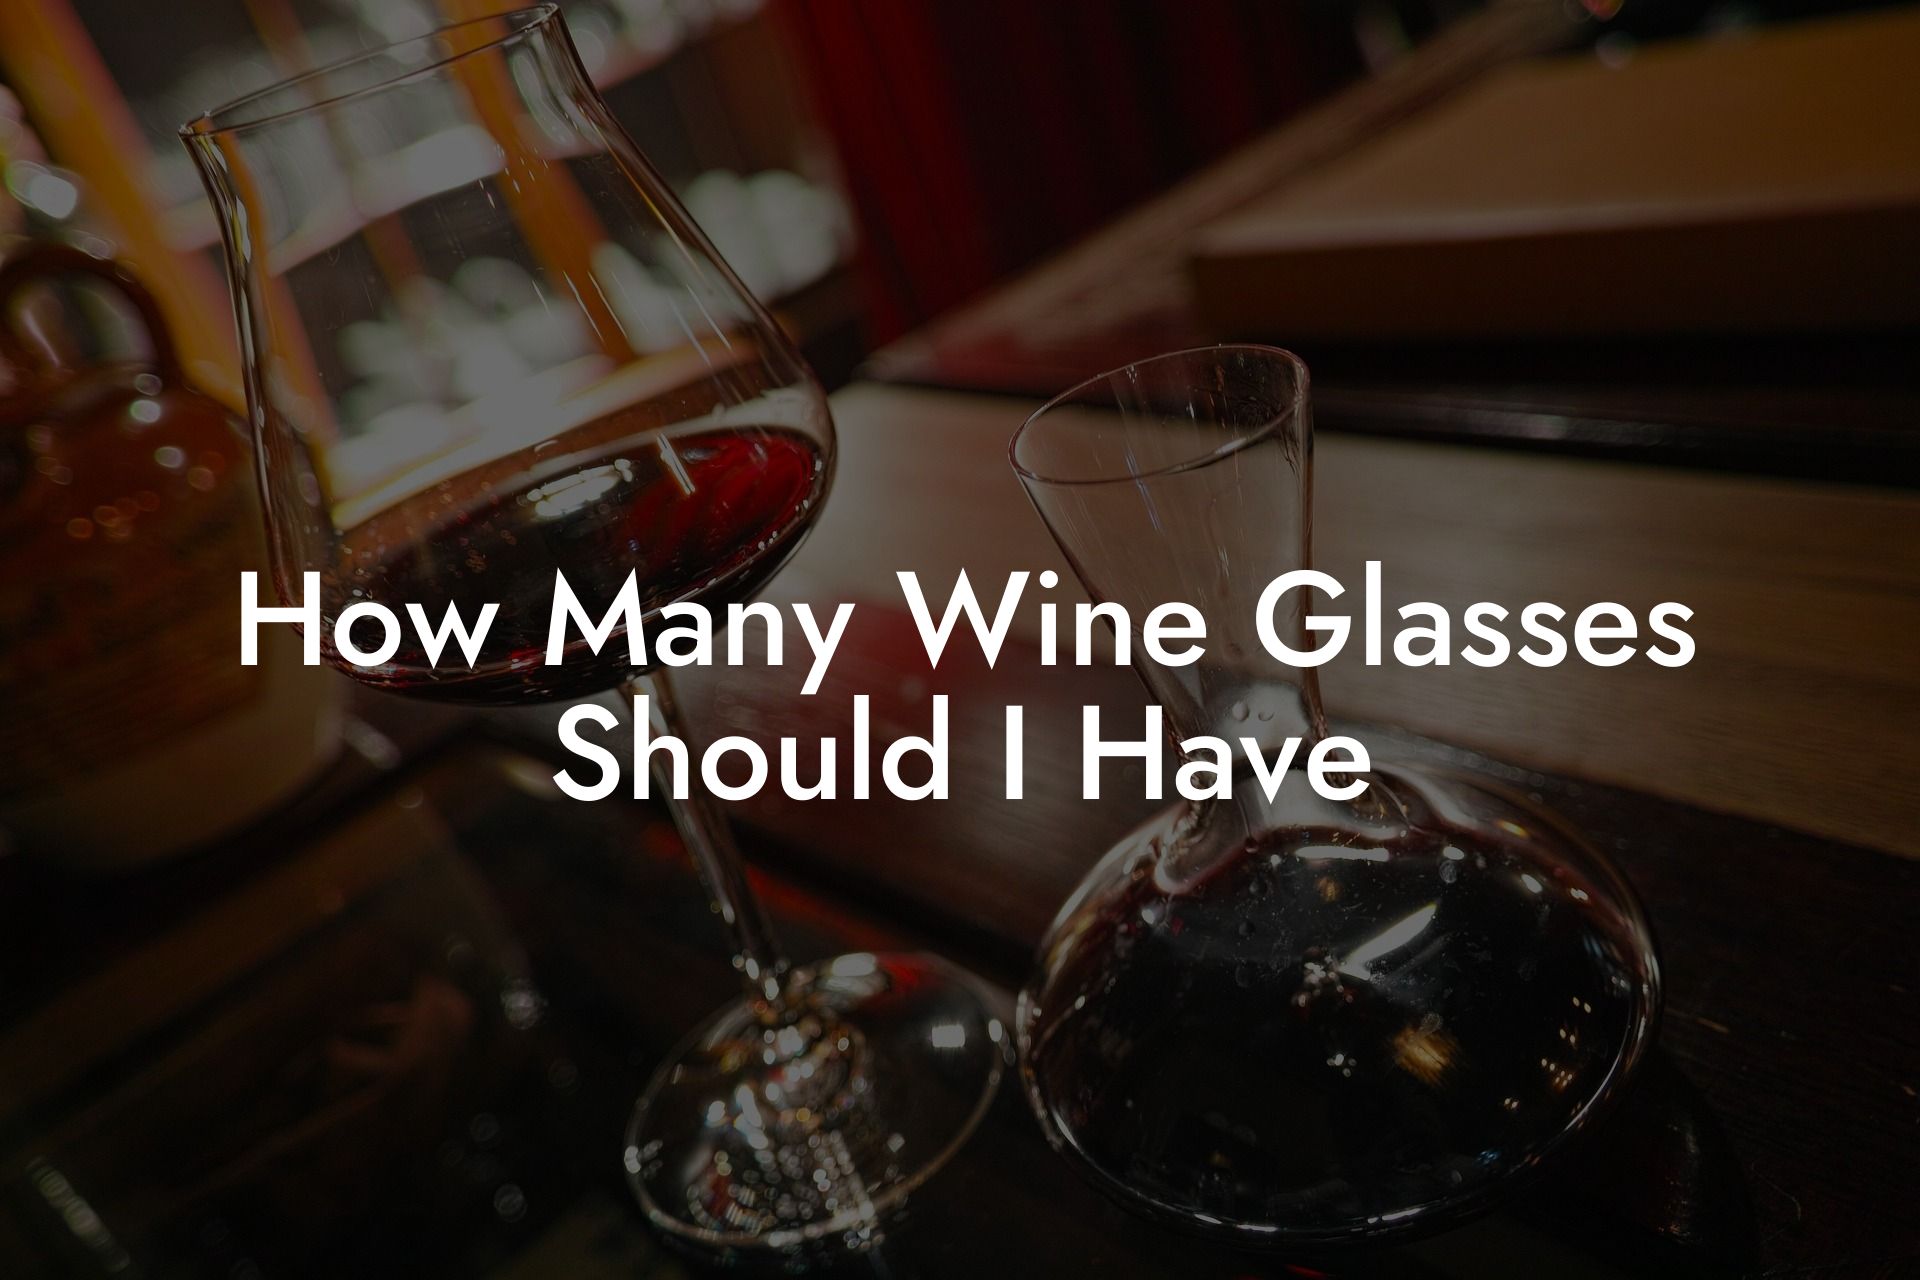 How Many Wine Glasses Should I Have